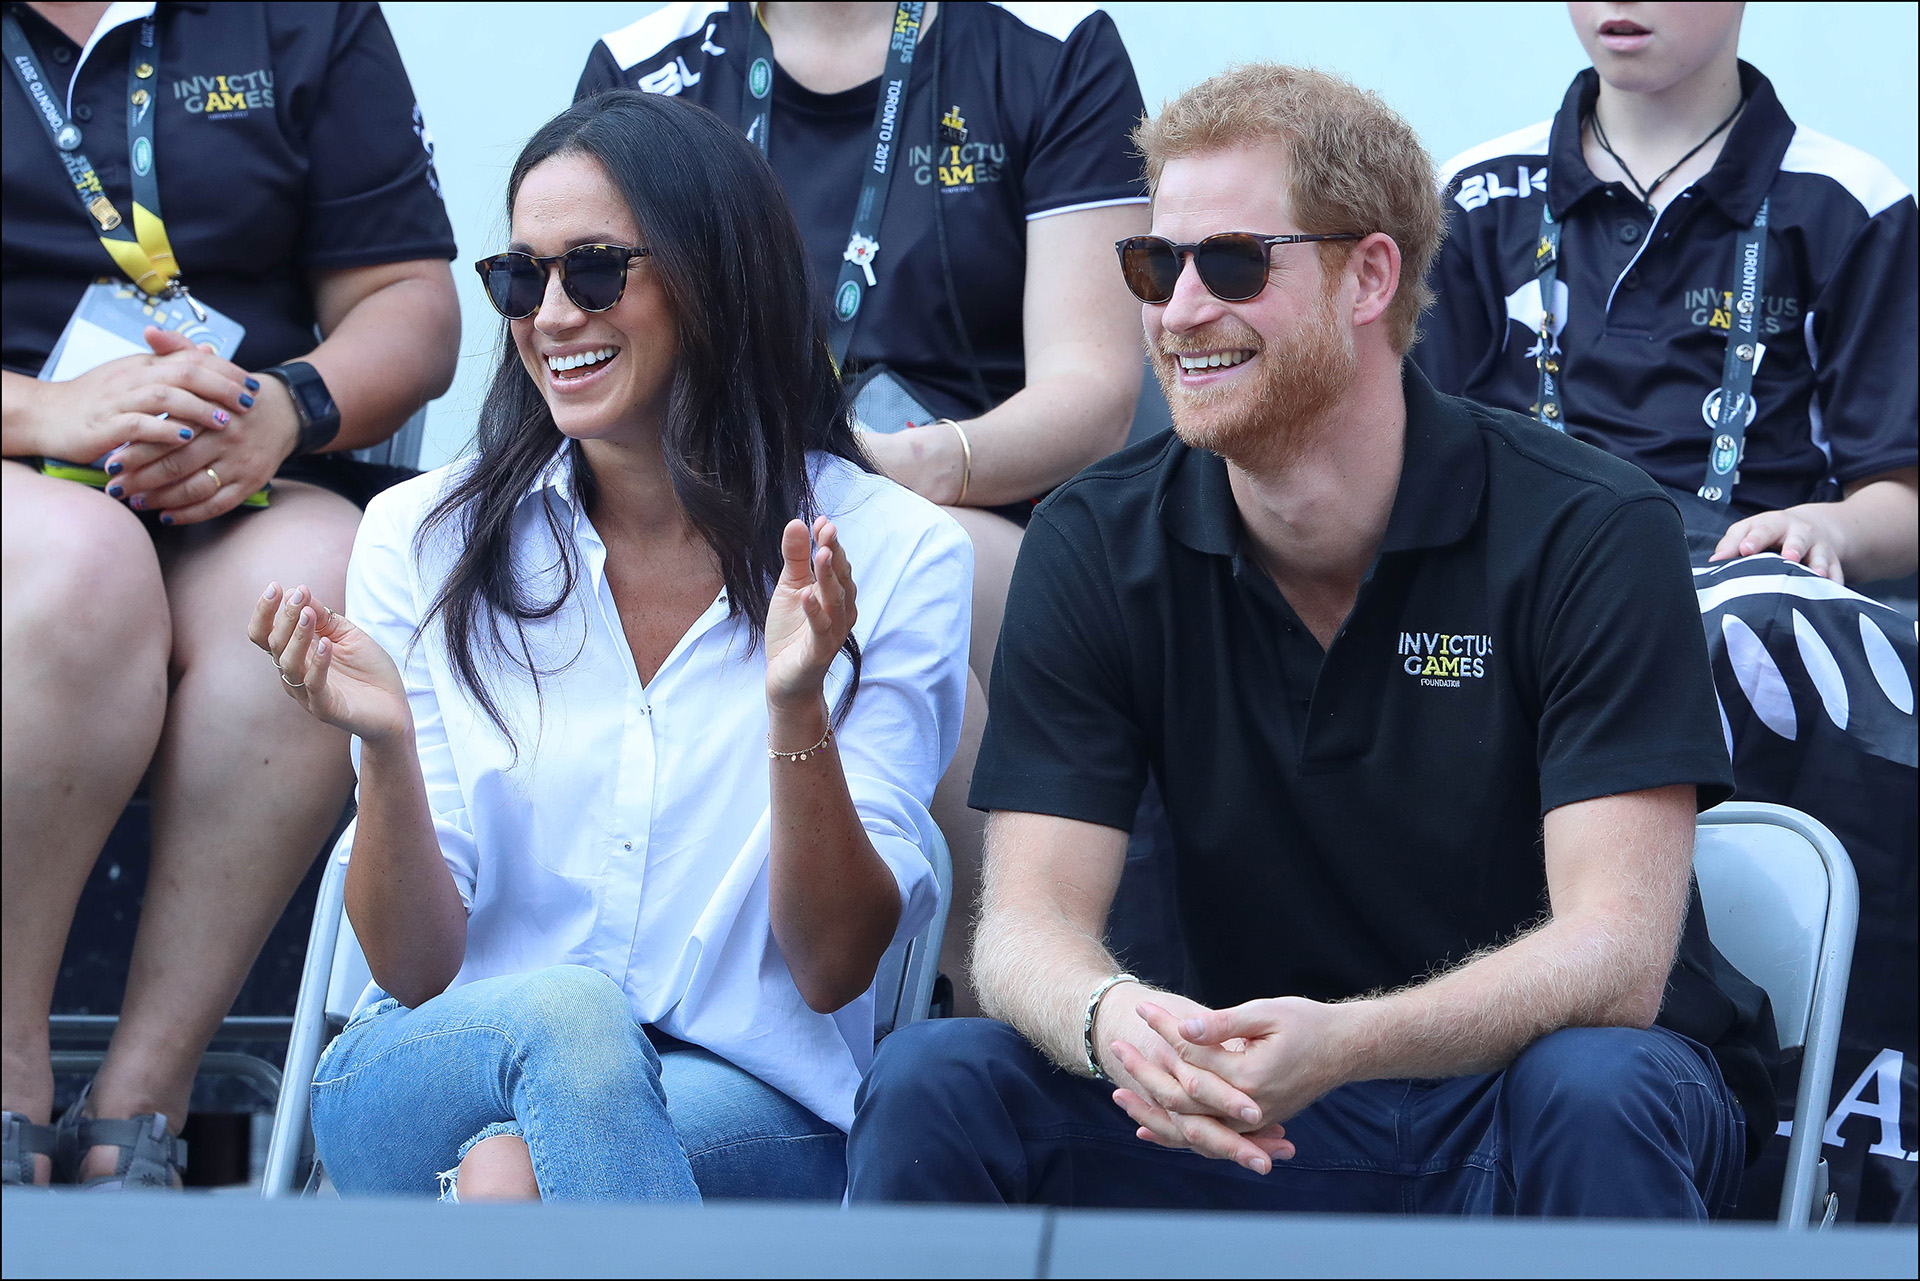 Prince Harry and Meghan Markle made their first public appearance together at the finals of the wheelchair tennis finals at the Invictus games Toronto 25 September 2017.